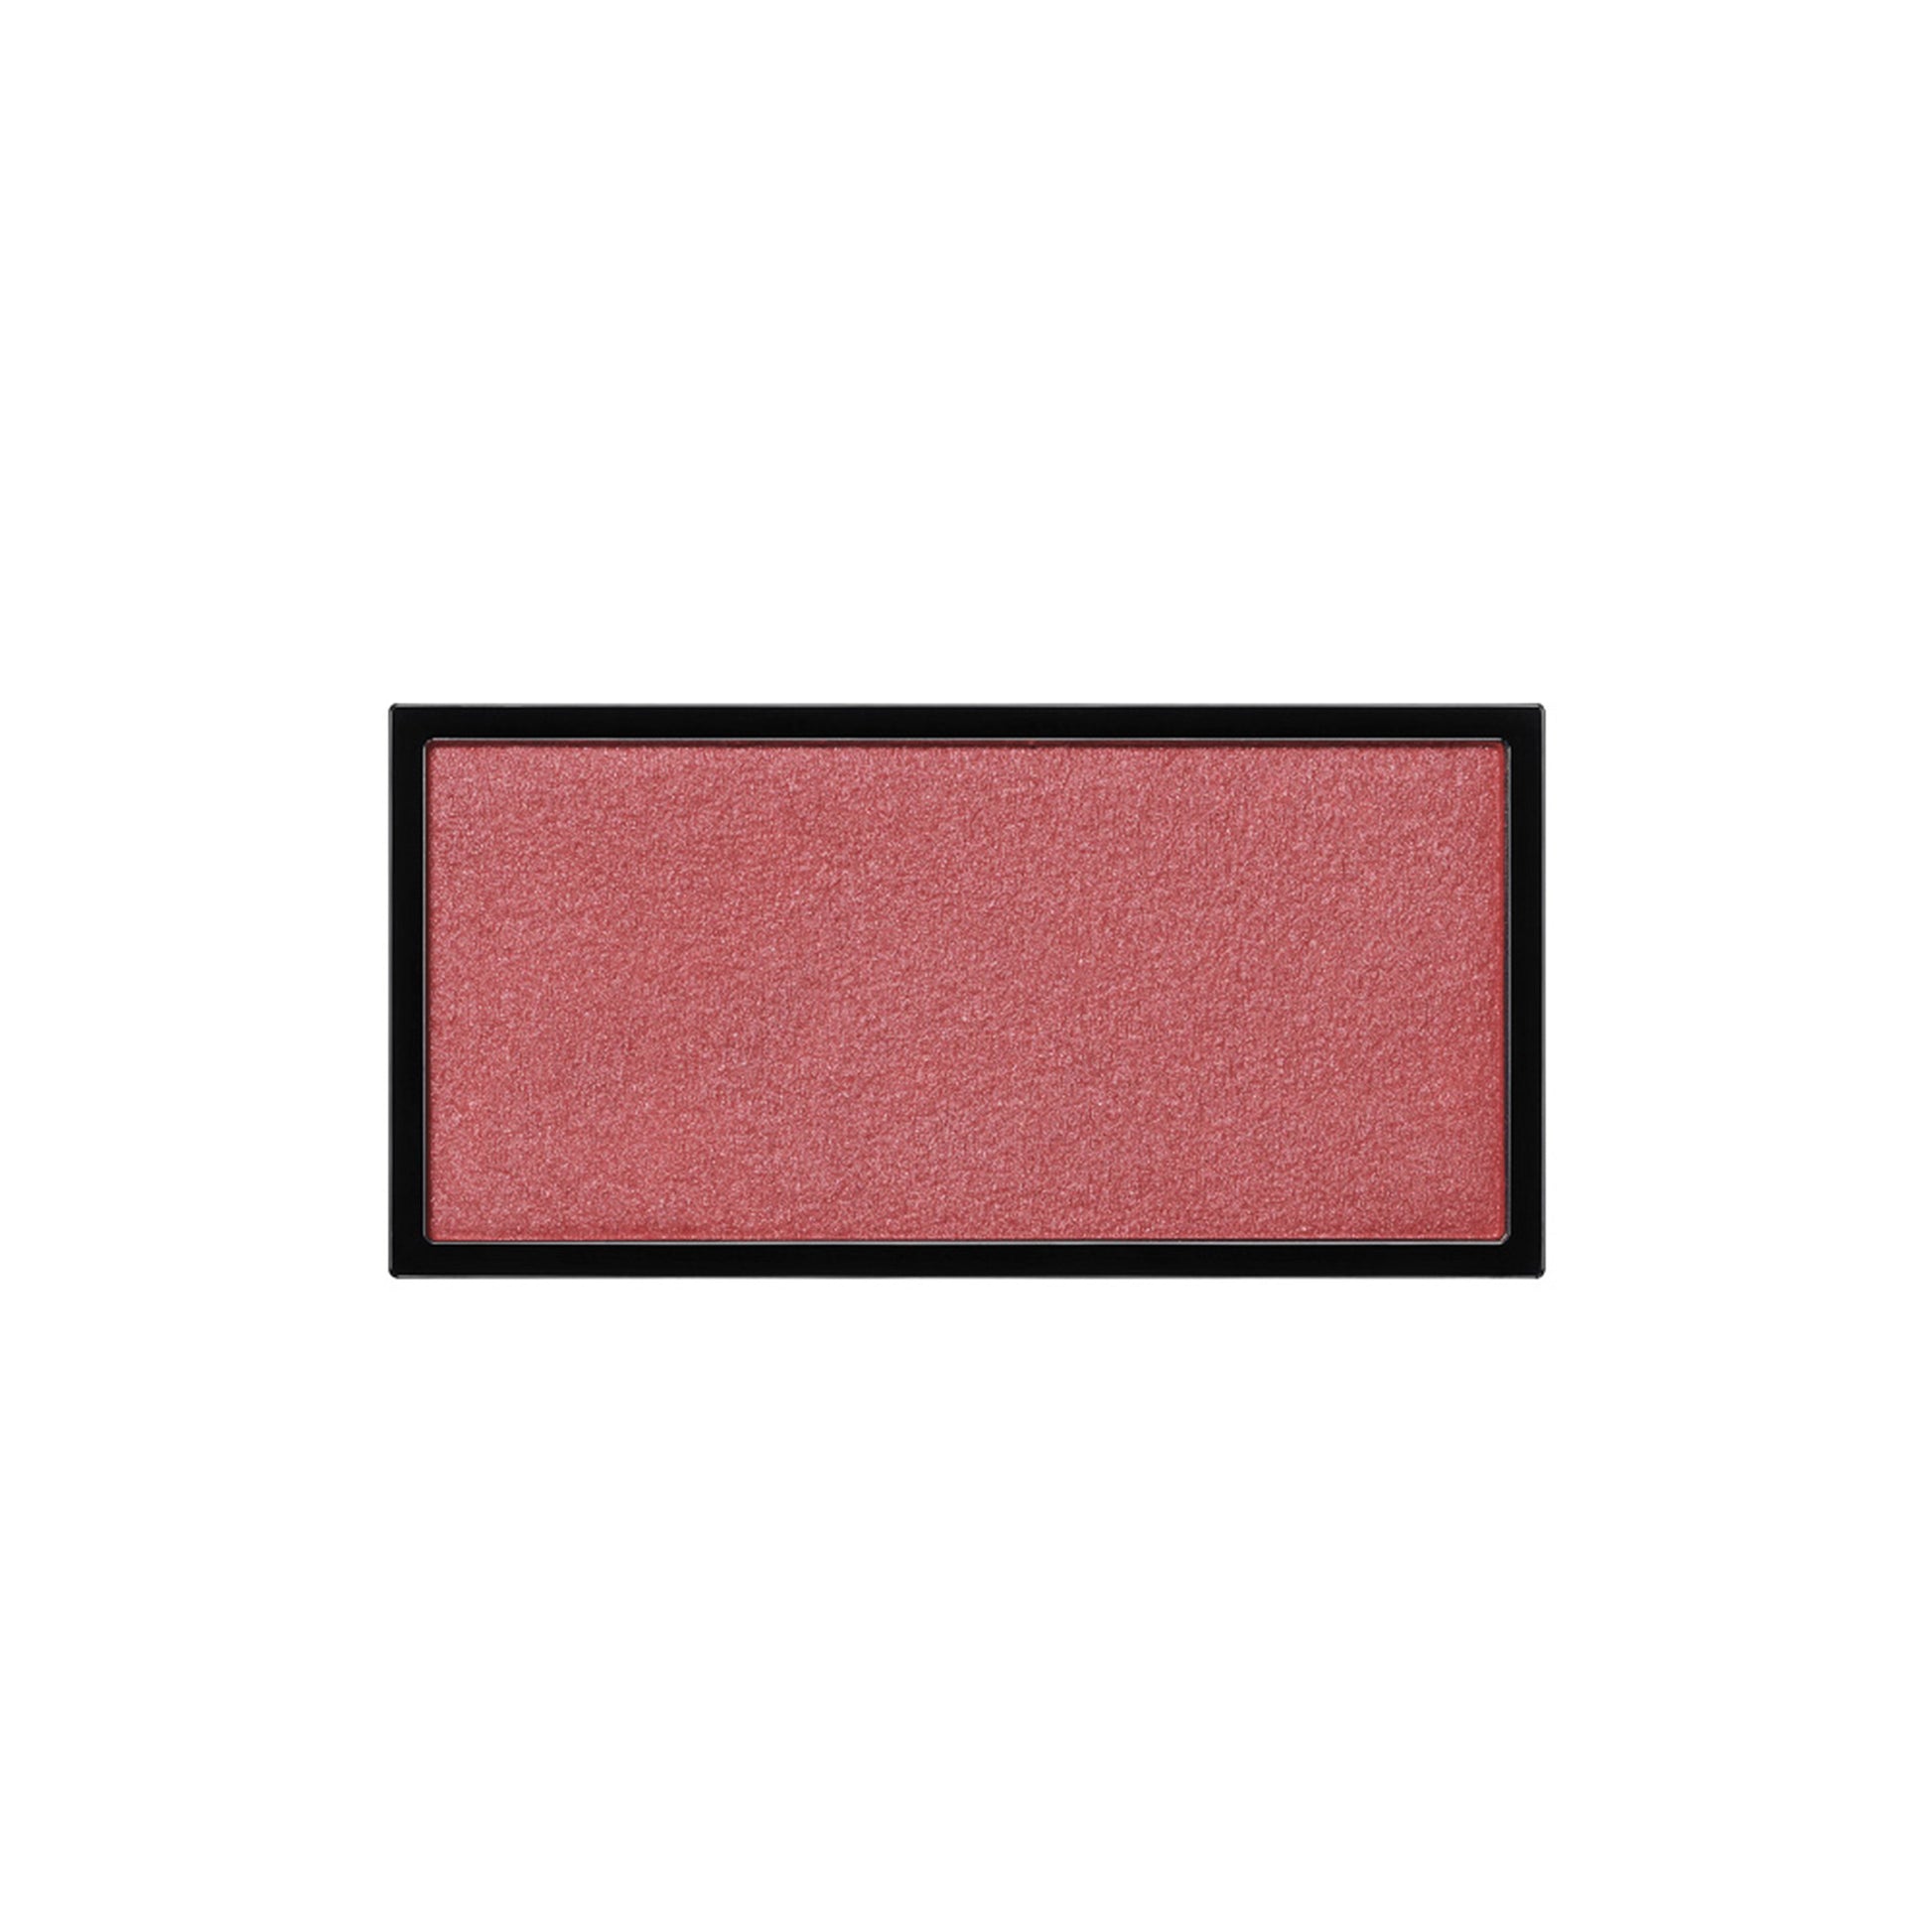 A rectangle shaped powder blush pan in a raspberry with a hint of brown